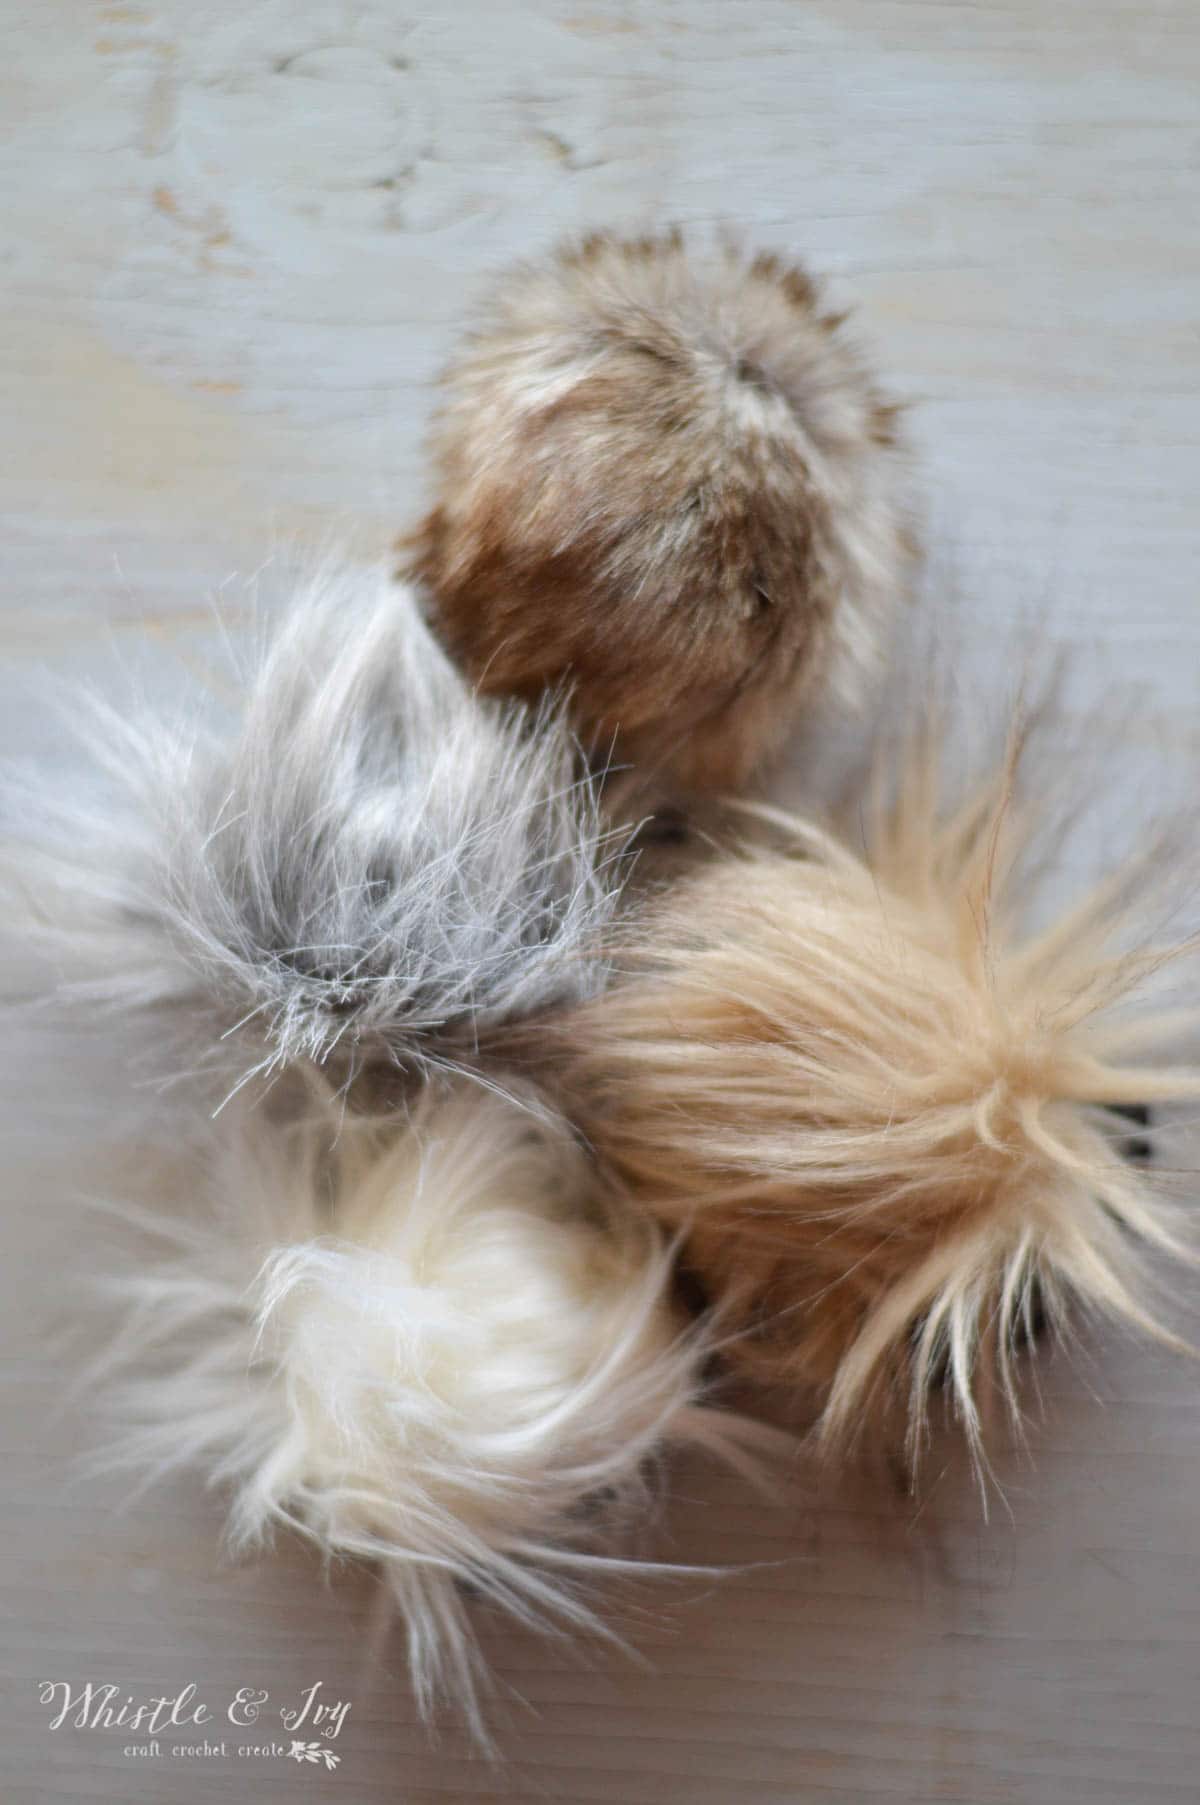 Learn how to make your own pom-poms : It's easier than you think! - Whistle  and Ivy